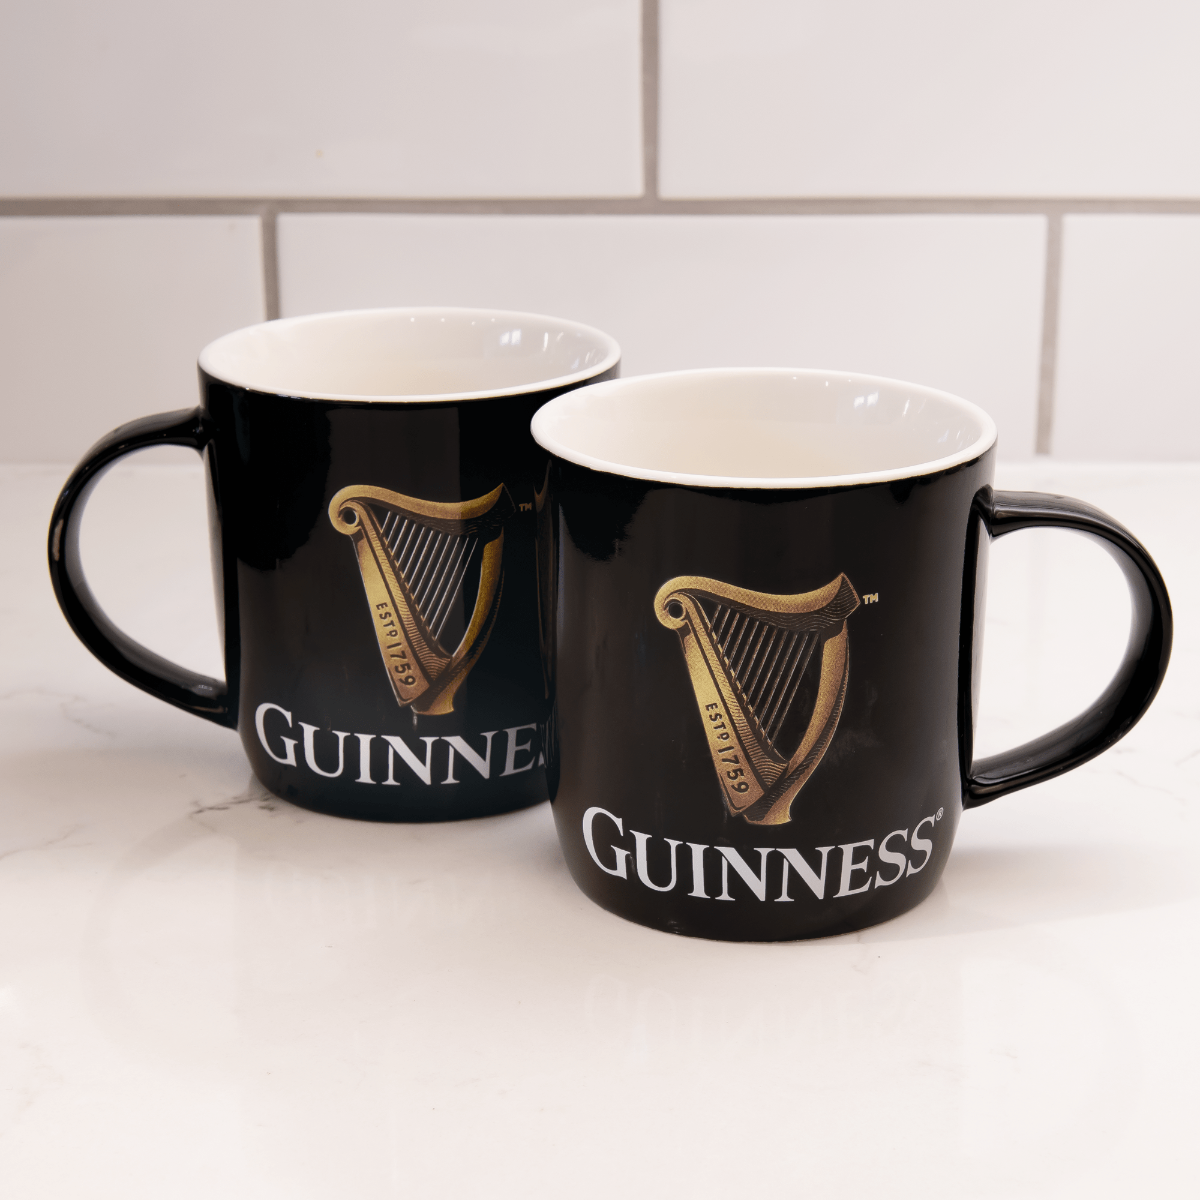 A Guinness Toucan Mug Set featuring two mugs adorned with a Toucan design displayed on a counter.